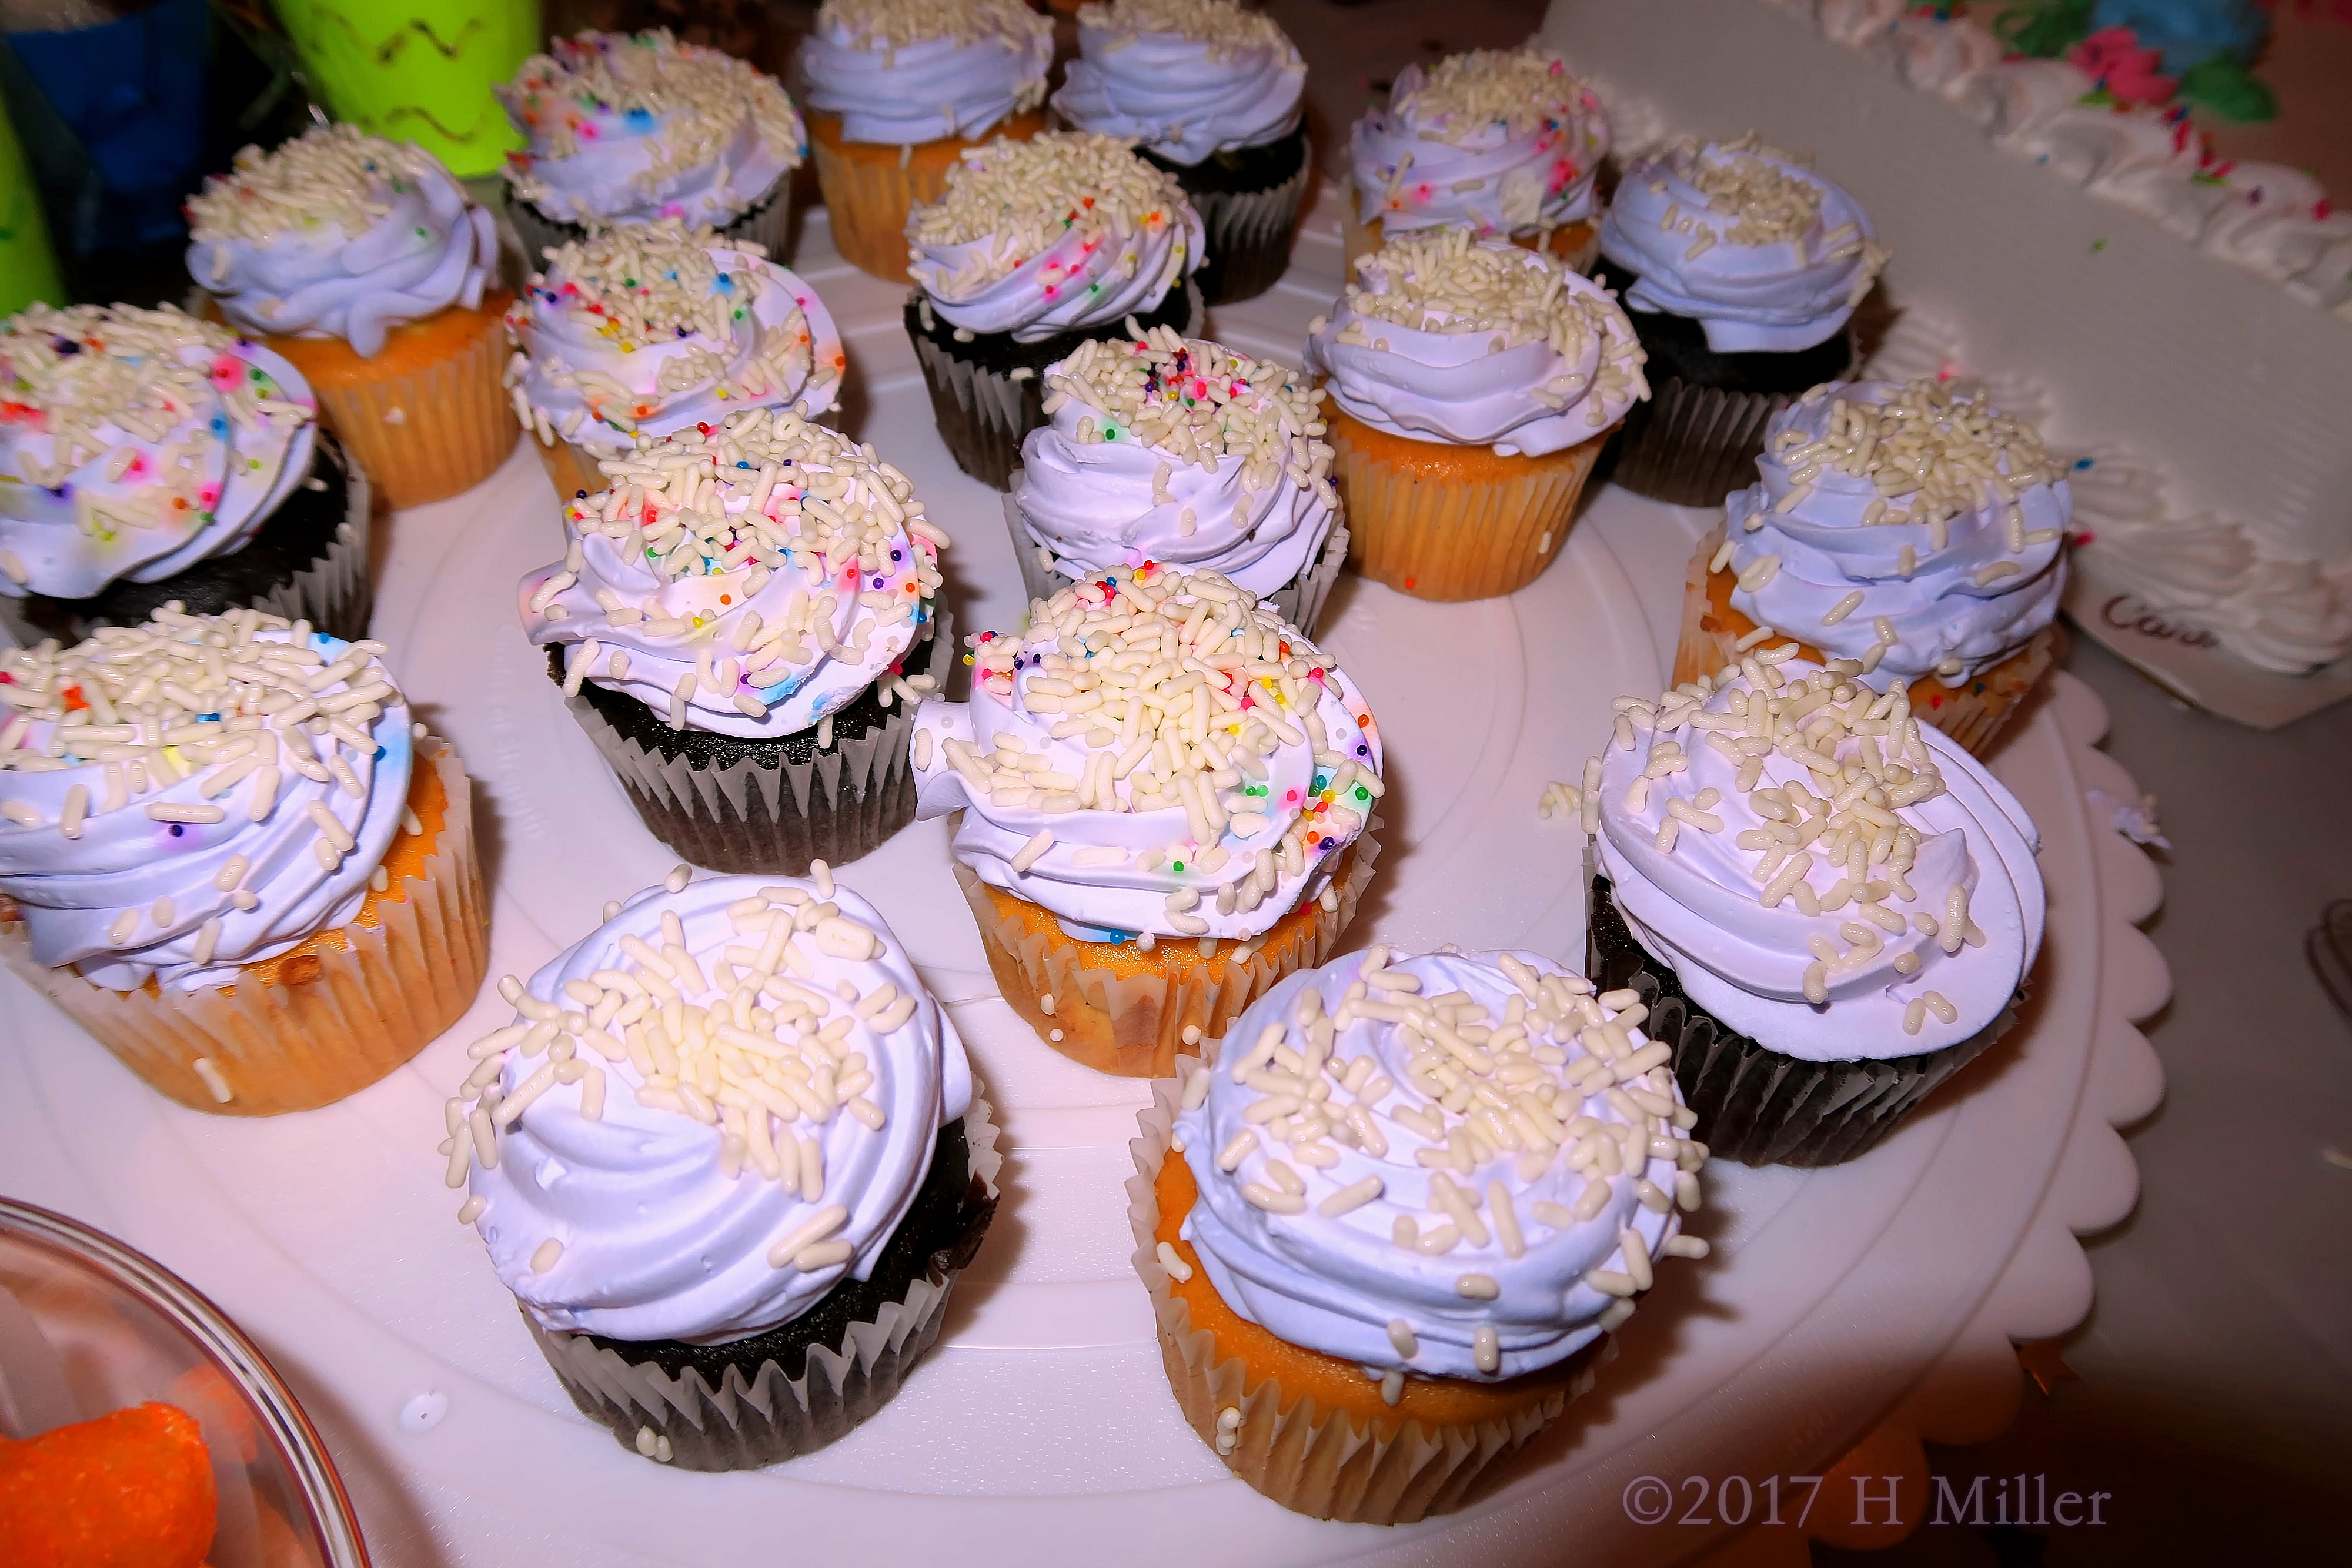 Awesome Cupcakes At The Spa Party For Girls! 